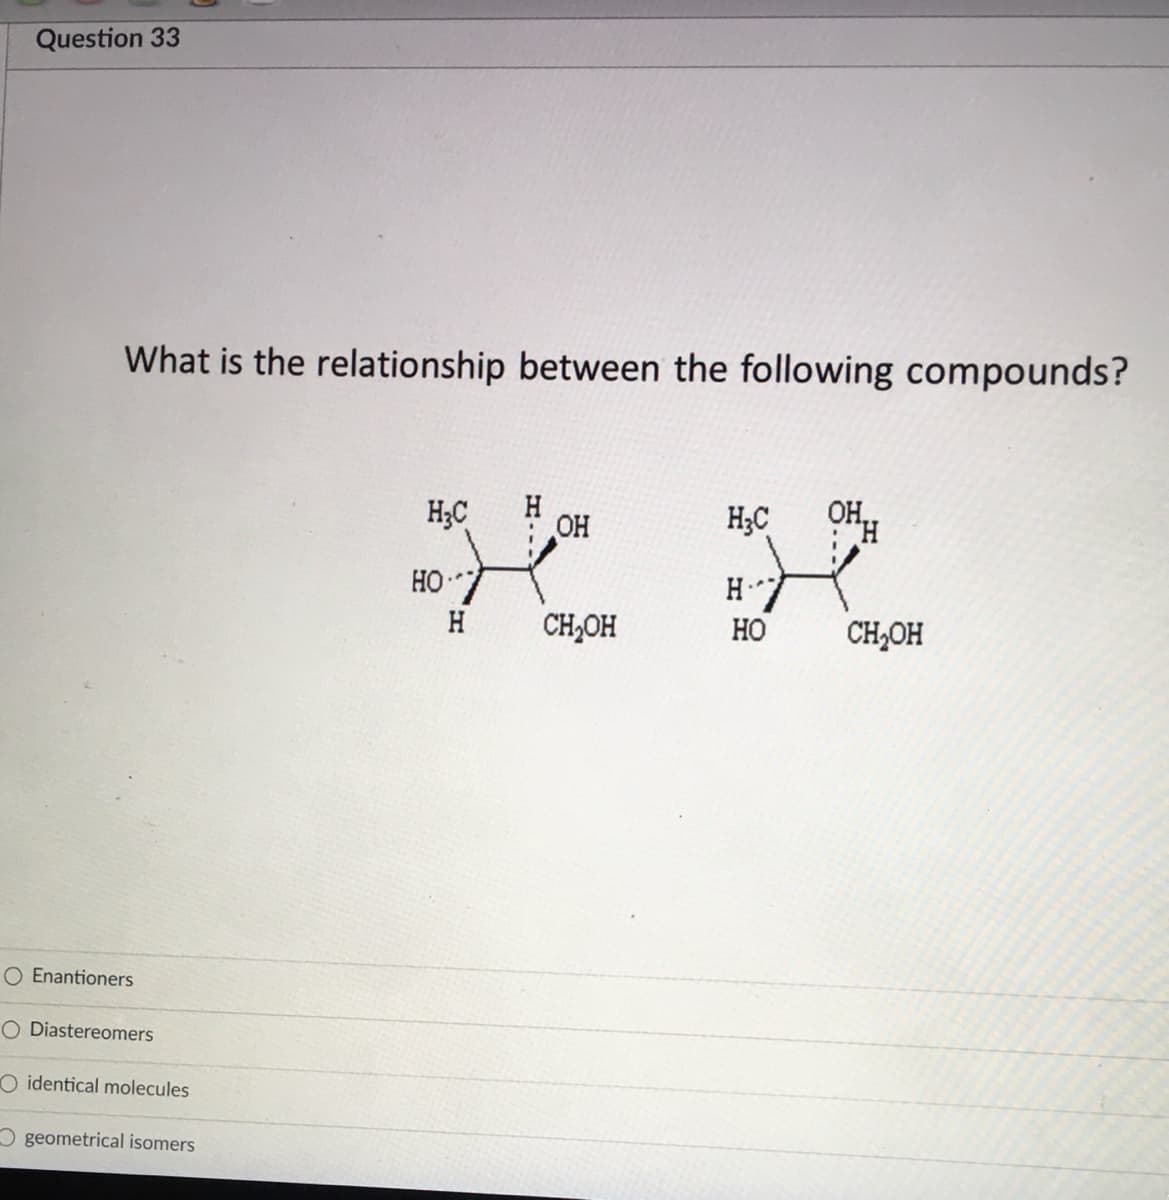 Question 33
What is the relationship between the following compounds?
H;C
OH
H;C
HO7
H.
H
CH,OH
Но
CH,OH
O Enantioners
O Diastereomers
O identical molecules
O geometrical isomers
